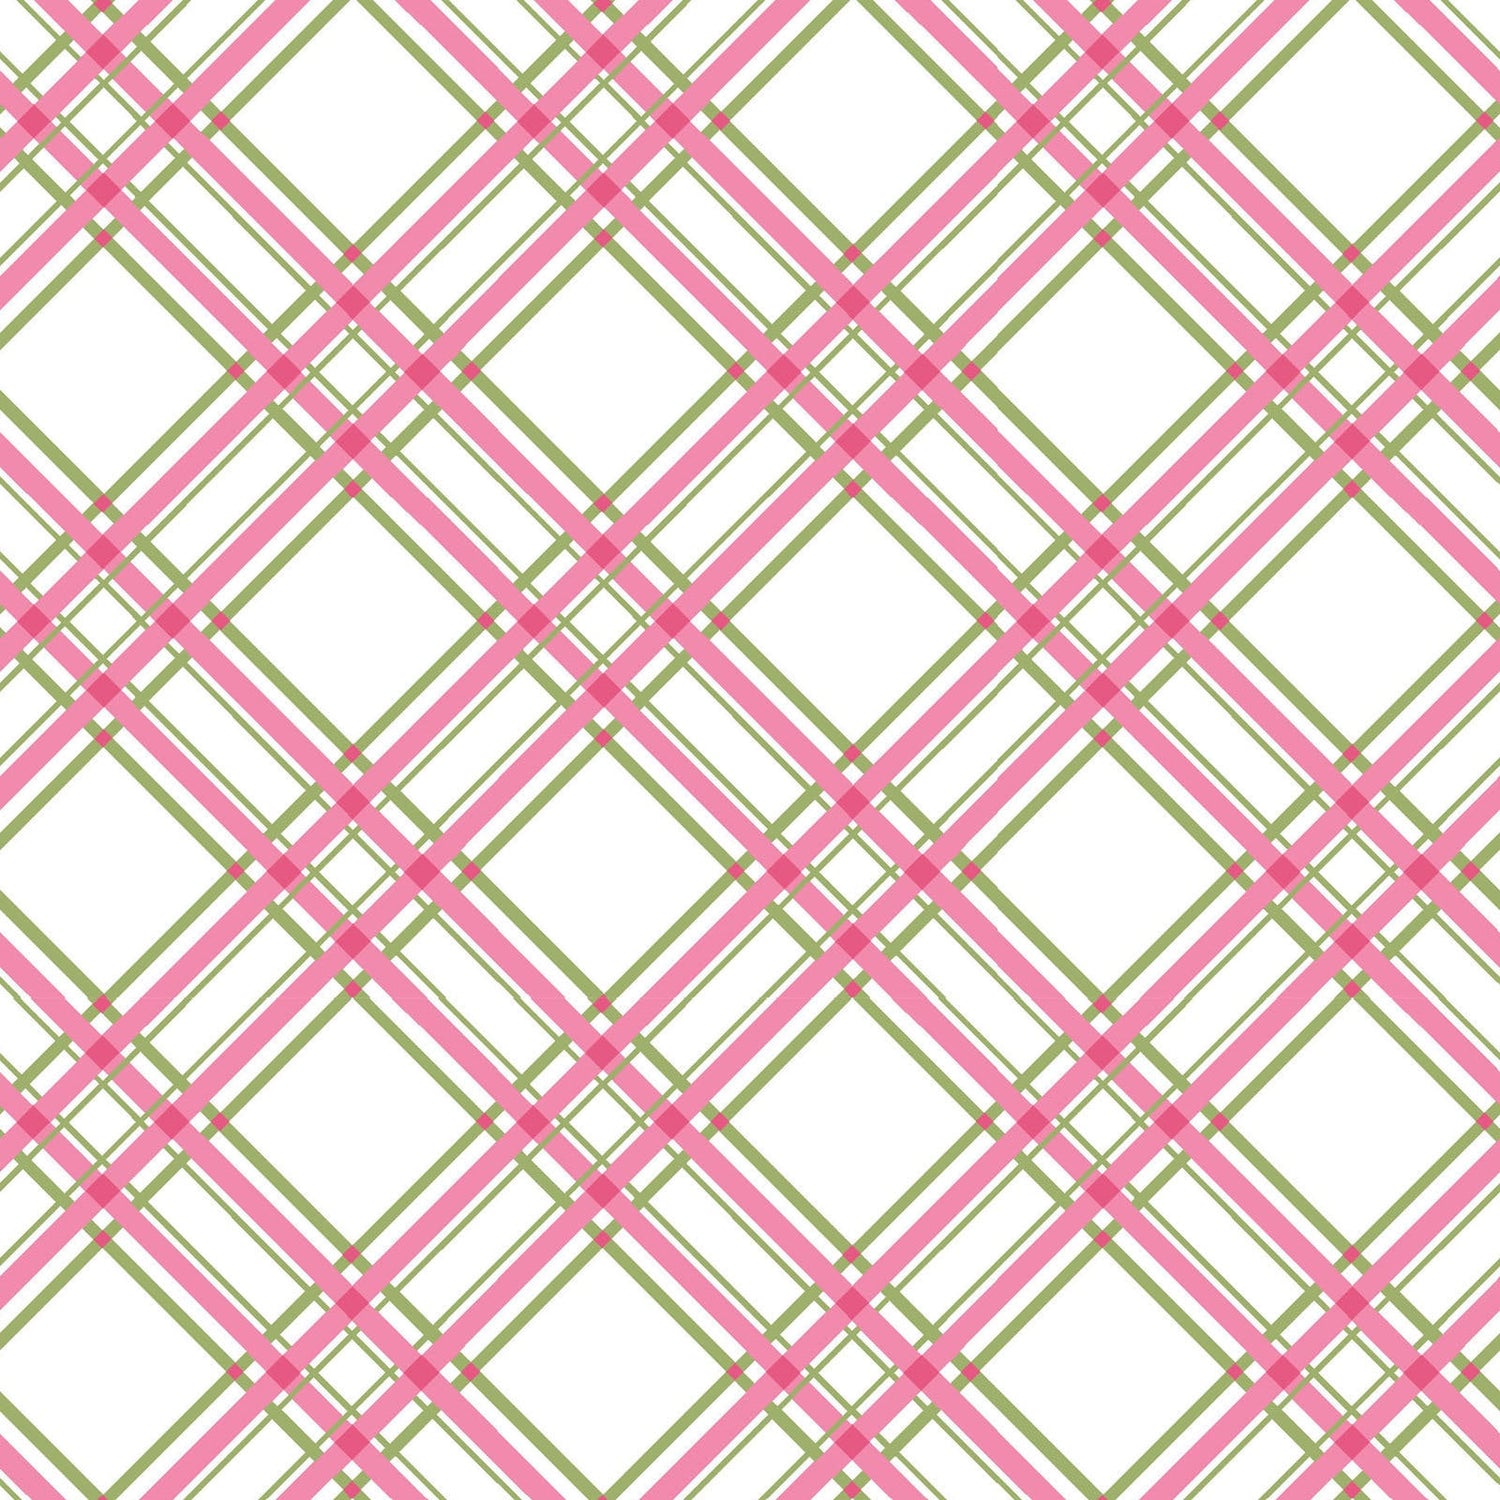 Pink/Green Diagonal Plaid Designed by Kim Christopherson of Kimberbell Designs for Maywood Studios